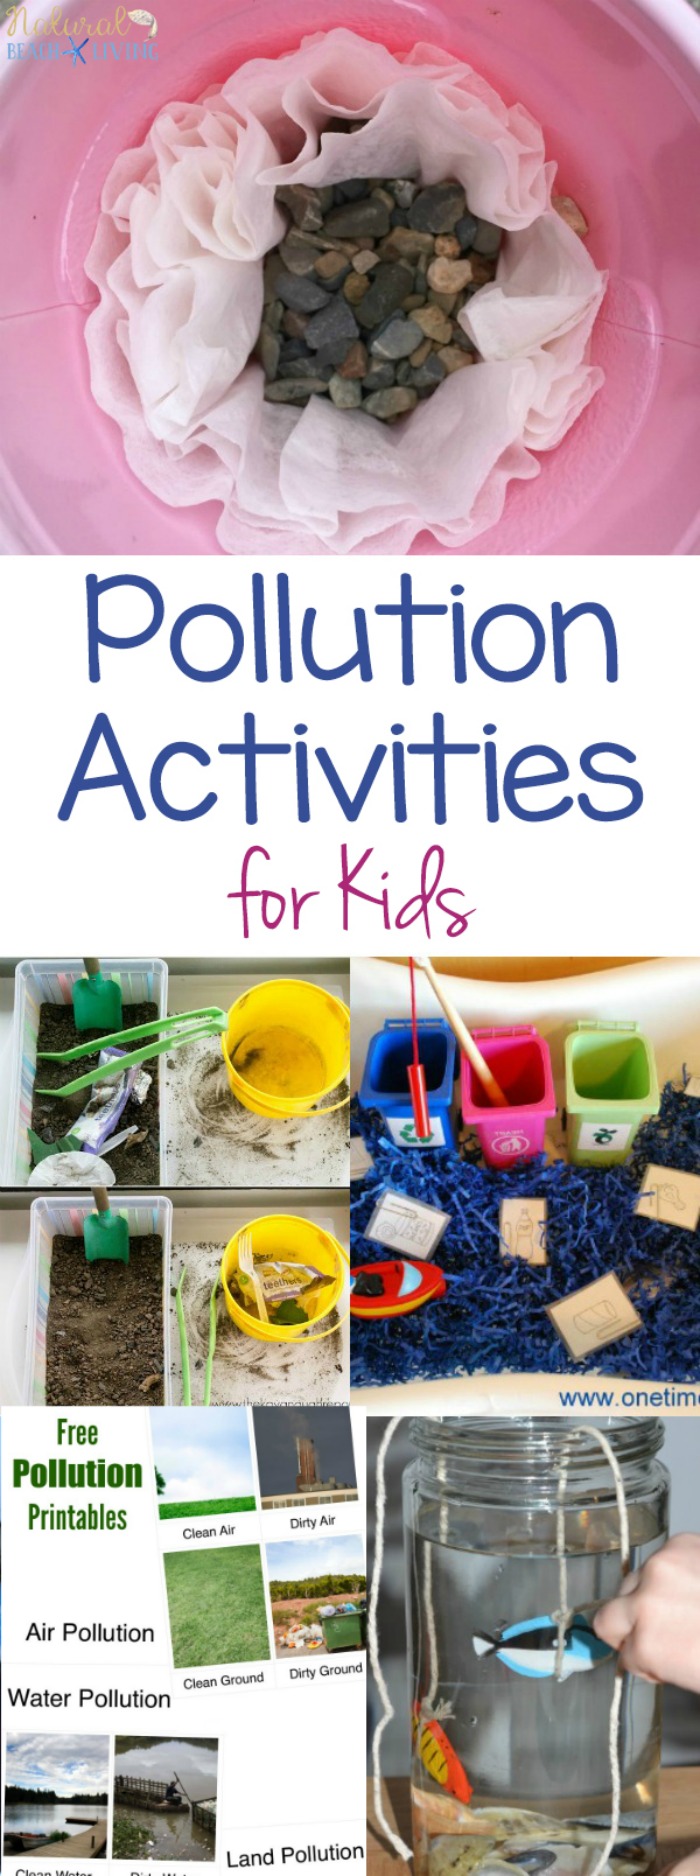 25 fun spring science activities for kids of all ages. From preschoolers to preteens, you'll find fascinating Science projects to try with flowers, jelly beans, seeds, water, static electricity, butterflies, birdseed ornaments, and more. FUN SPRING THEME IDEAS and Spring Activities for Preschoolers Science